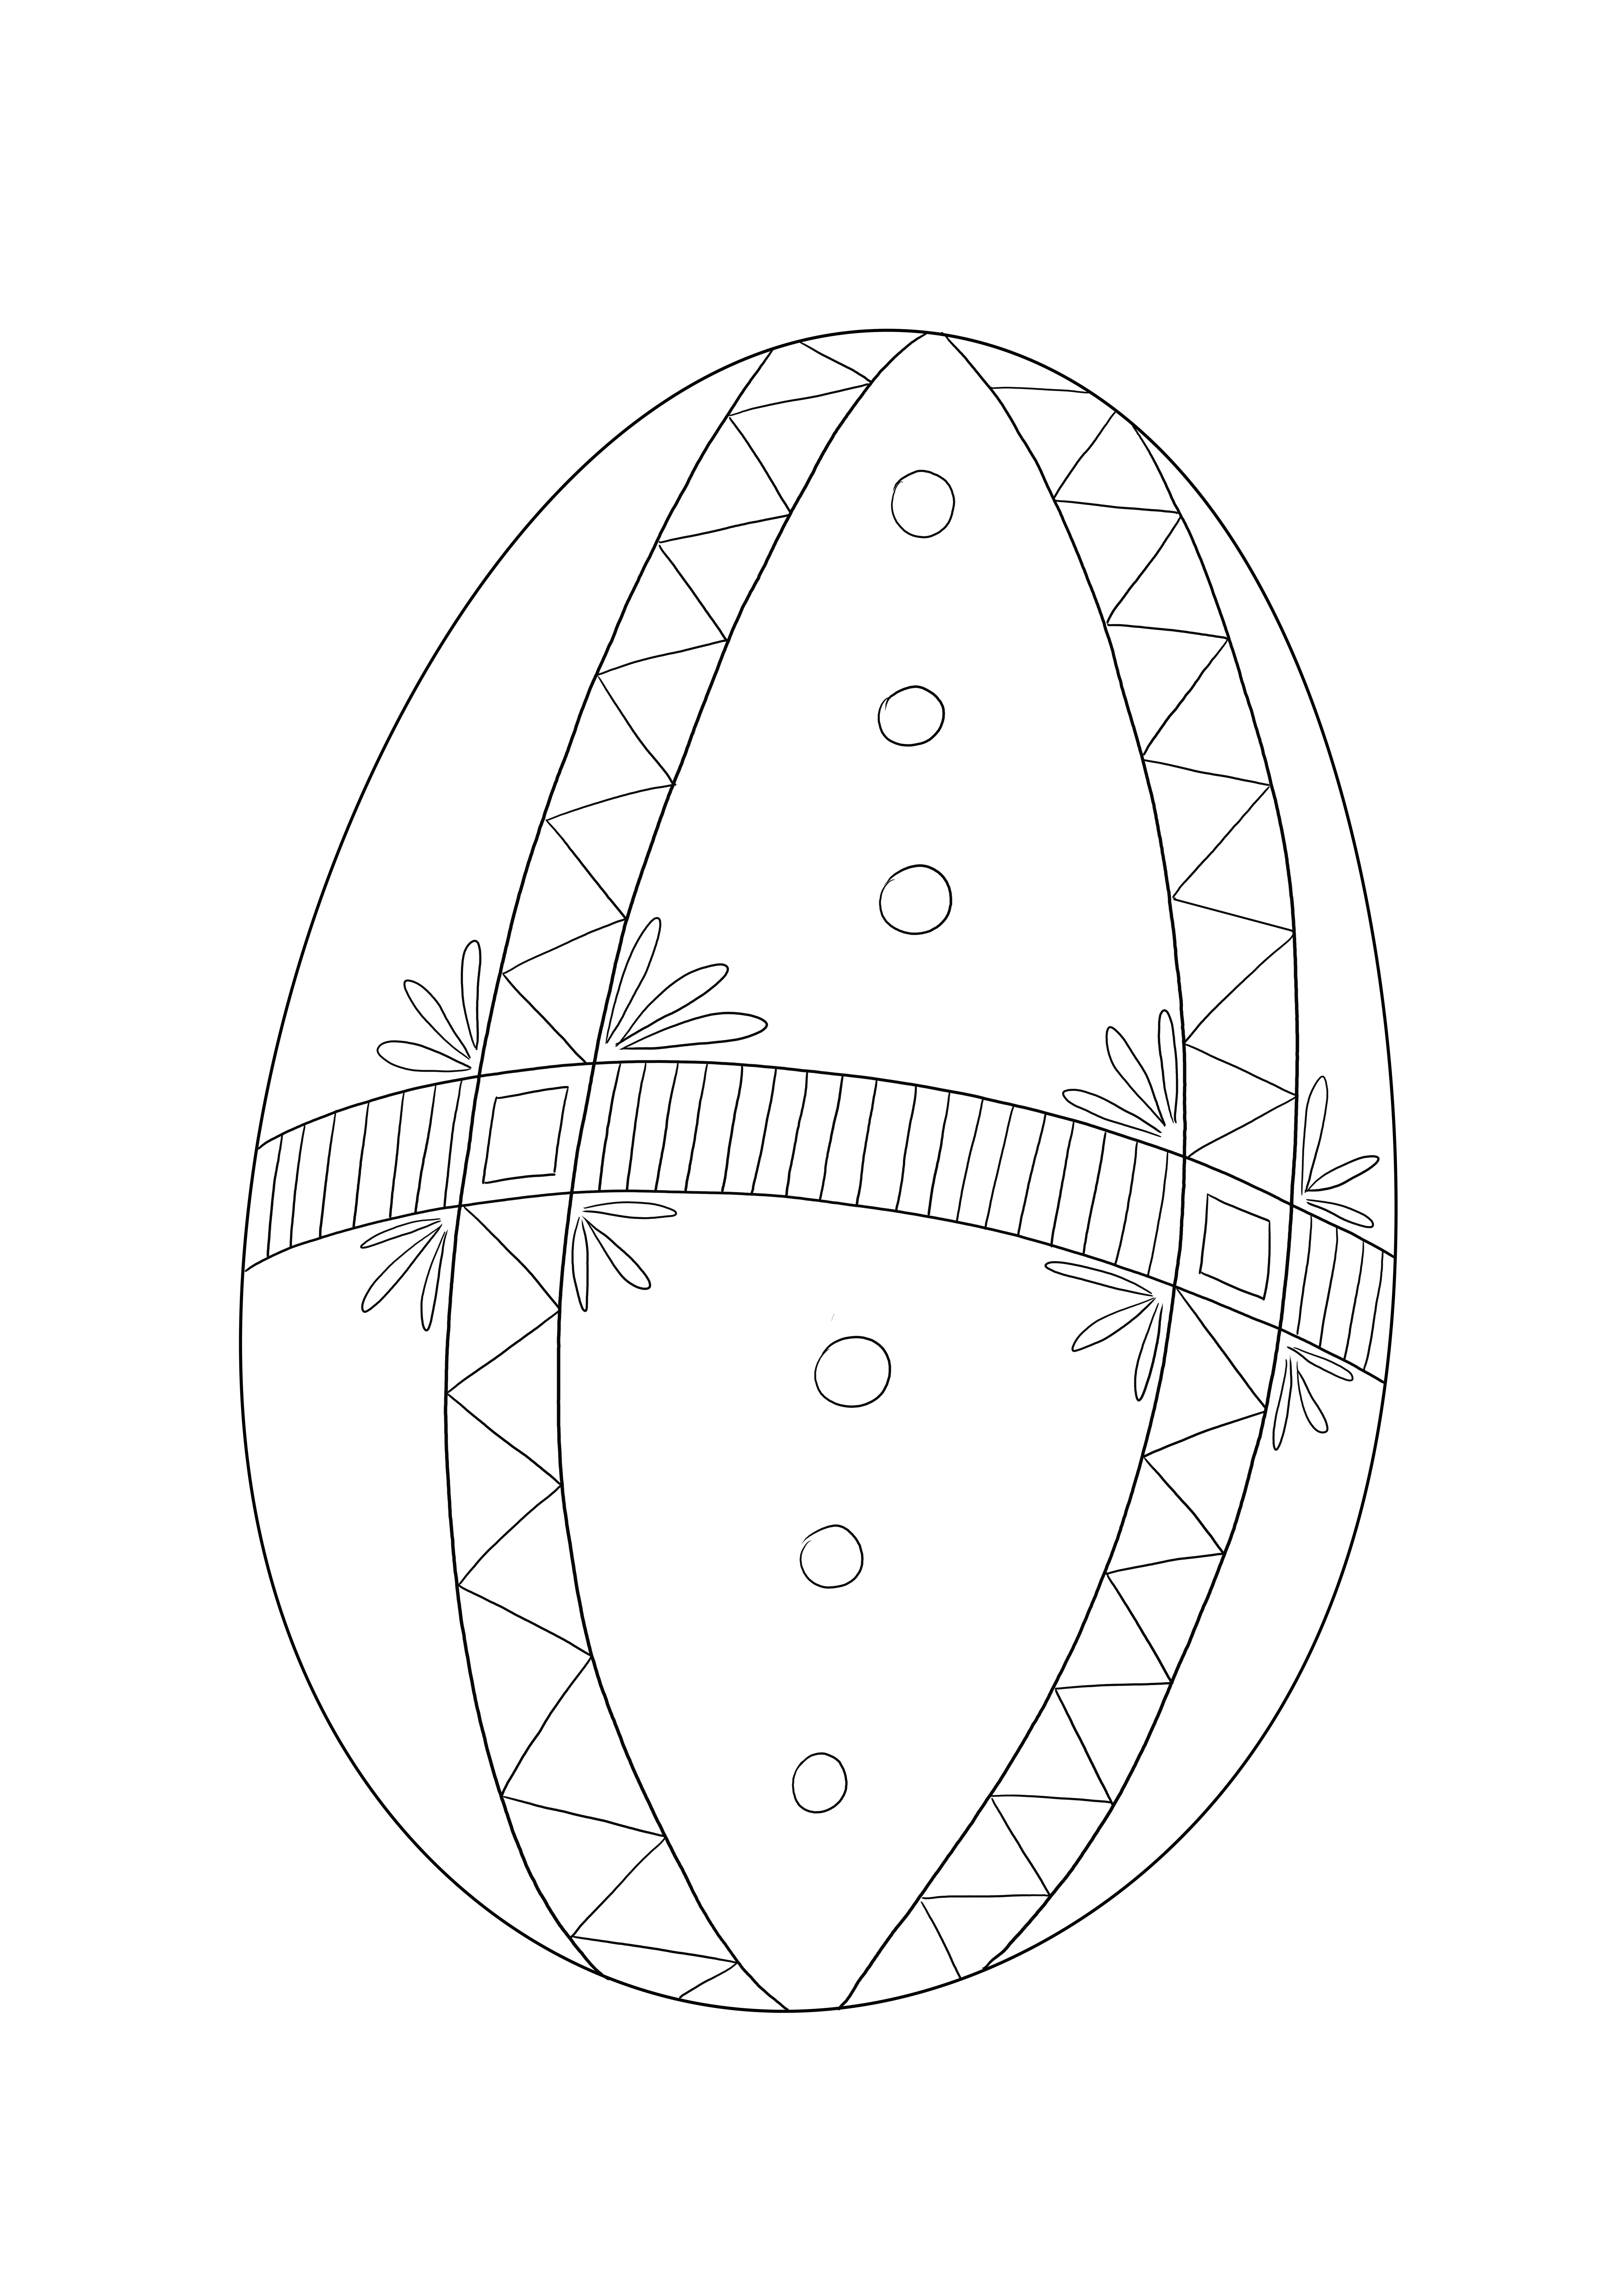 Pysanka Easter Egg freebie for simple coloring and free to download sheet